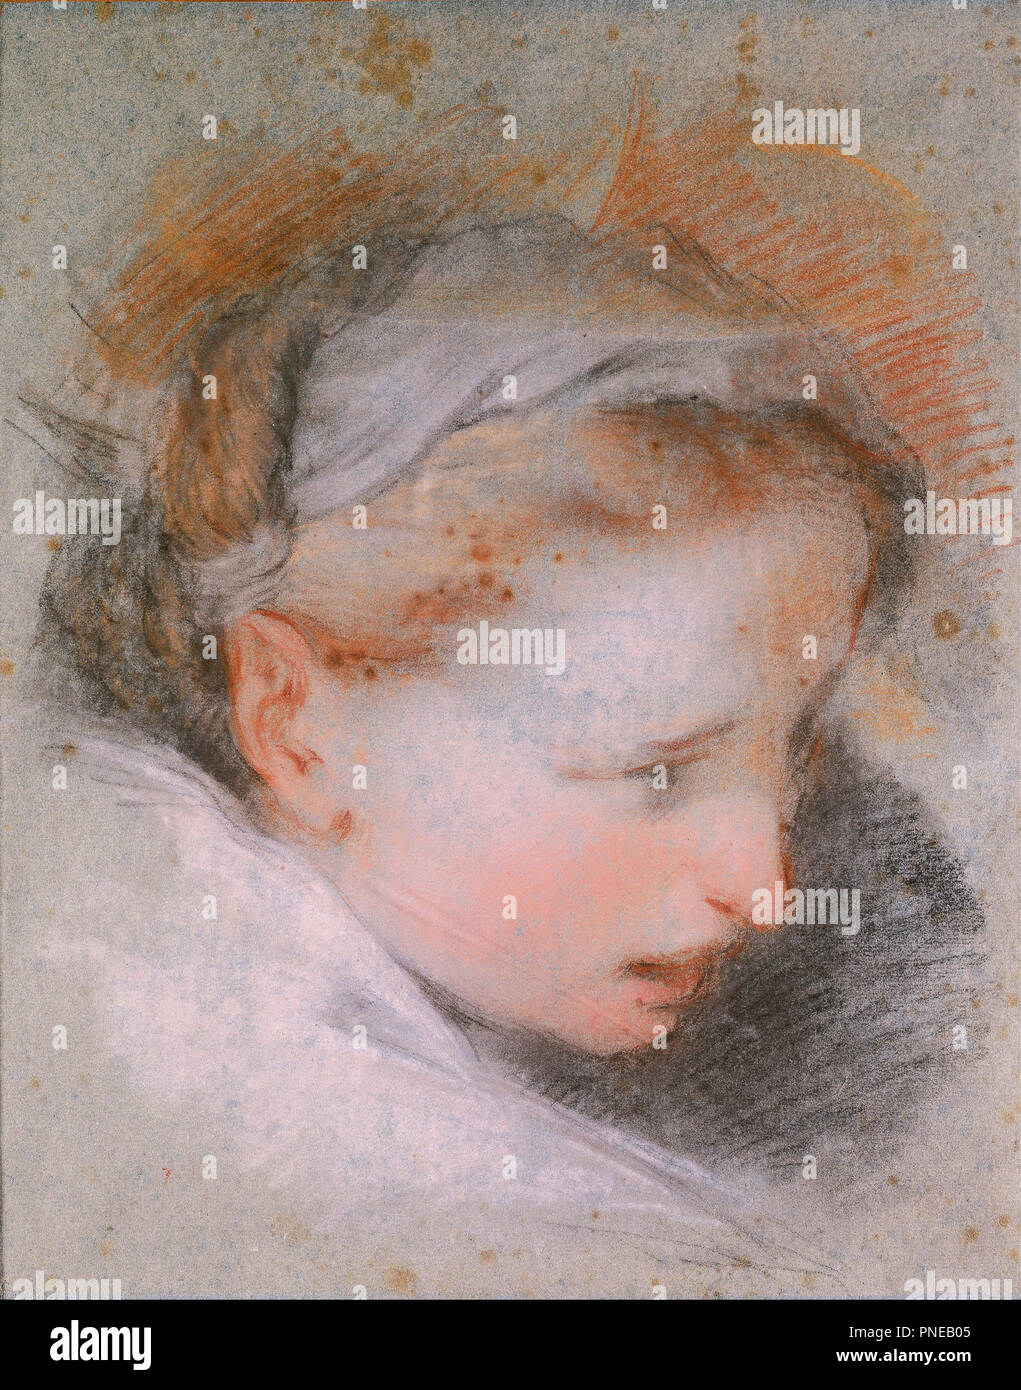 Head of a Woman, 1568-1569. Date/Period: From 1568 until 1569. Drawing. Black chalk, white chalk, sanguine and pastel on paper (Black, white, and red chalk, ocher and pink pastel). Author: BAROCCI, FEDERICO. Barocci, Federigo. Stock Photo